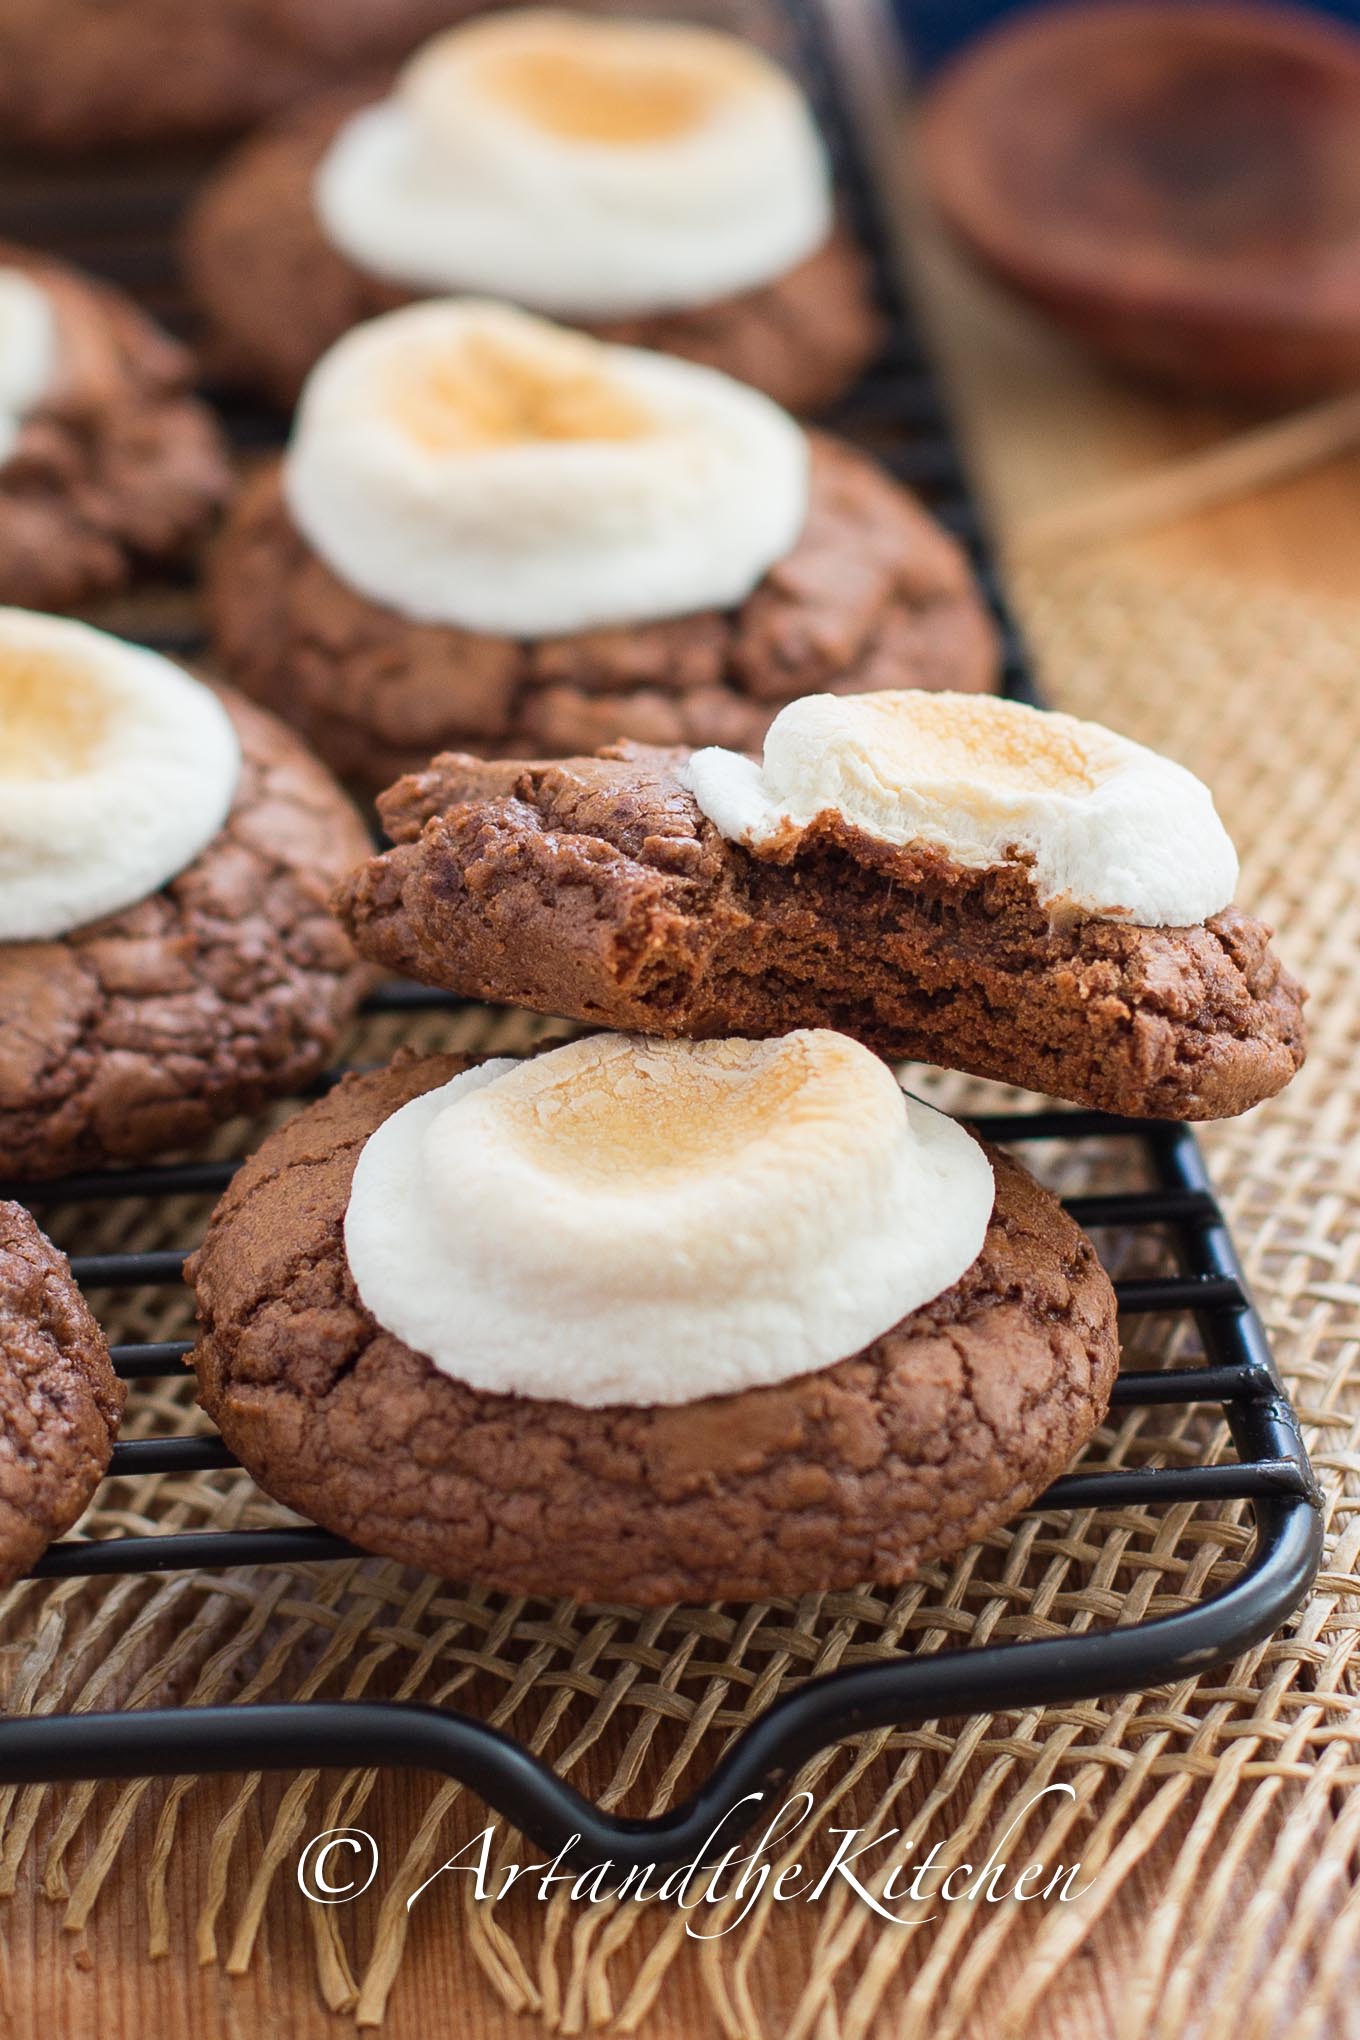 Chocolate cookies with toasted marshmallow on top.